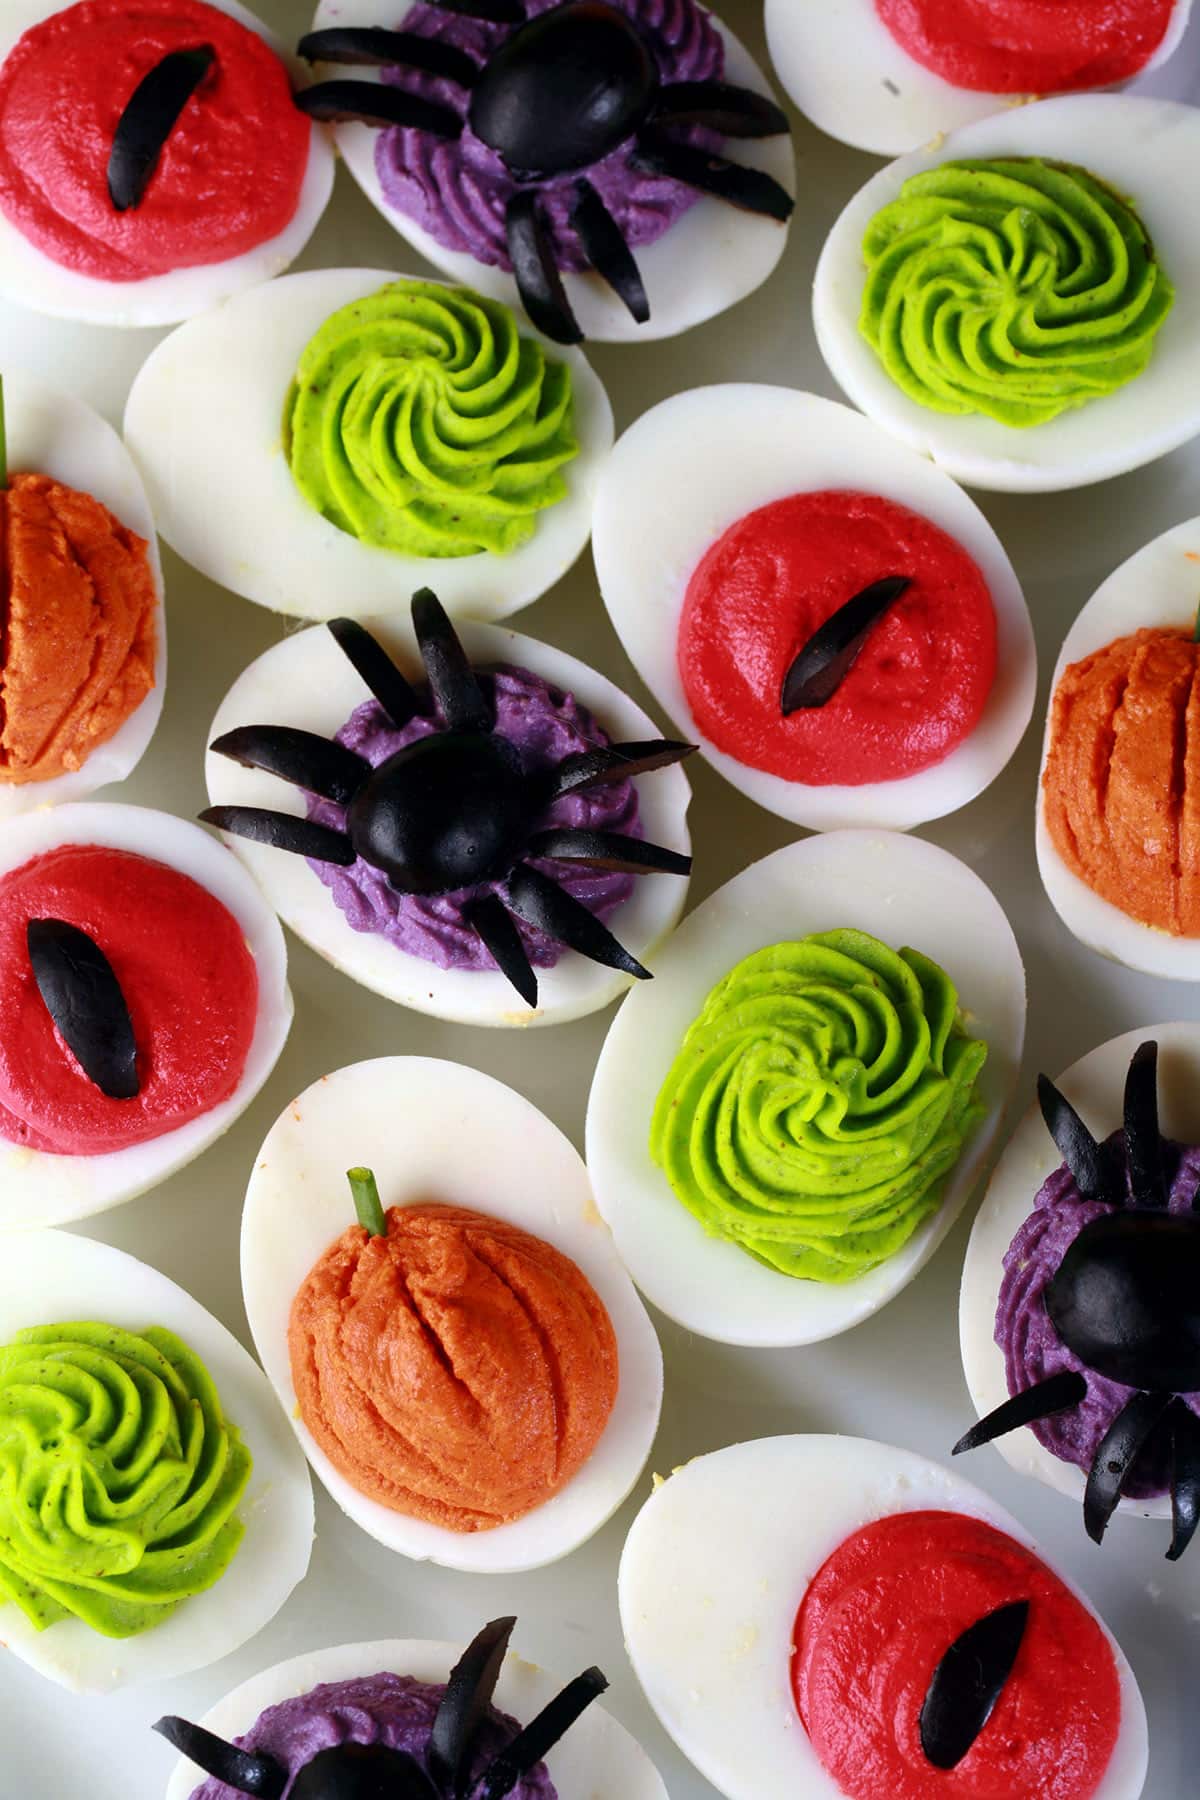 A plate of Halloween deviled eggs, with a variety of fillings and styles in red, orange, lime green, and purple.